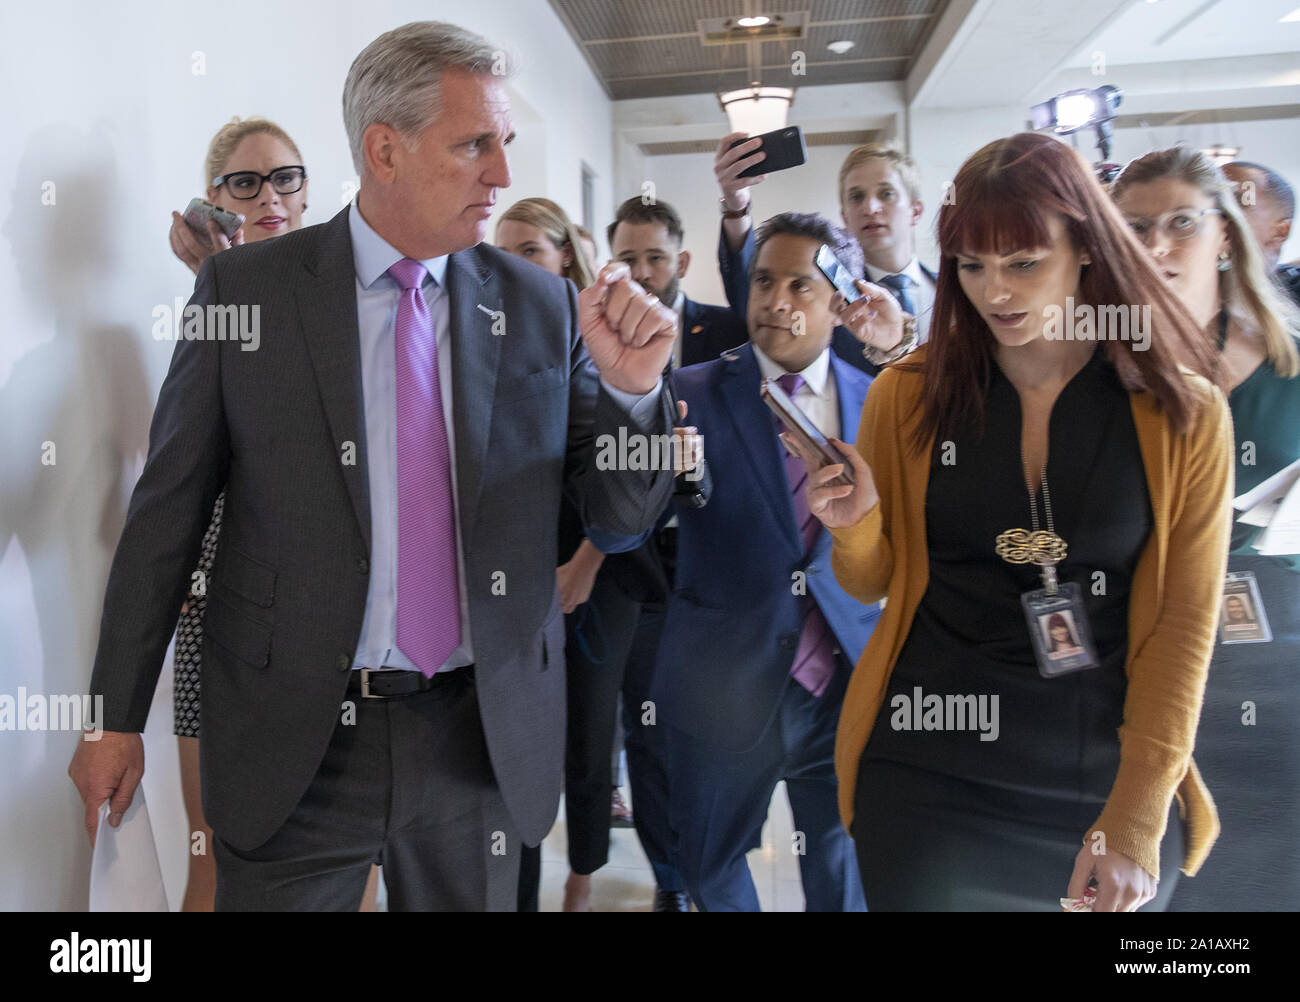 Washington, United States. 25th Sep, 2019. U.S. House Minority Leader Rep. Kevin McCarthy (R-CA) speaks to the media after the announcement by Speaker of the House Rep. Nancy Pelosi (D-CA) that the House is launching a formal impeachment inquiry into President Trump, on Capitol Hill in Washington, DC on Wednesday, September 25, 2019. Photo by Tasos Katopodis/UPI Credit: UPI/Alamy Live News Stock Photo